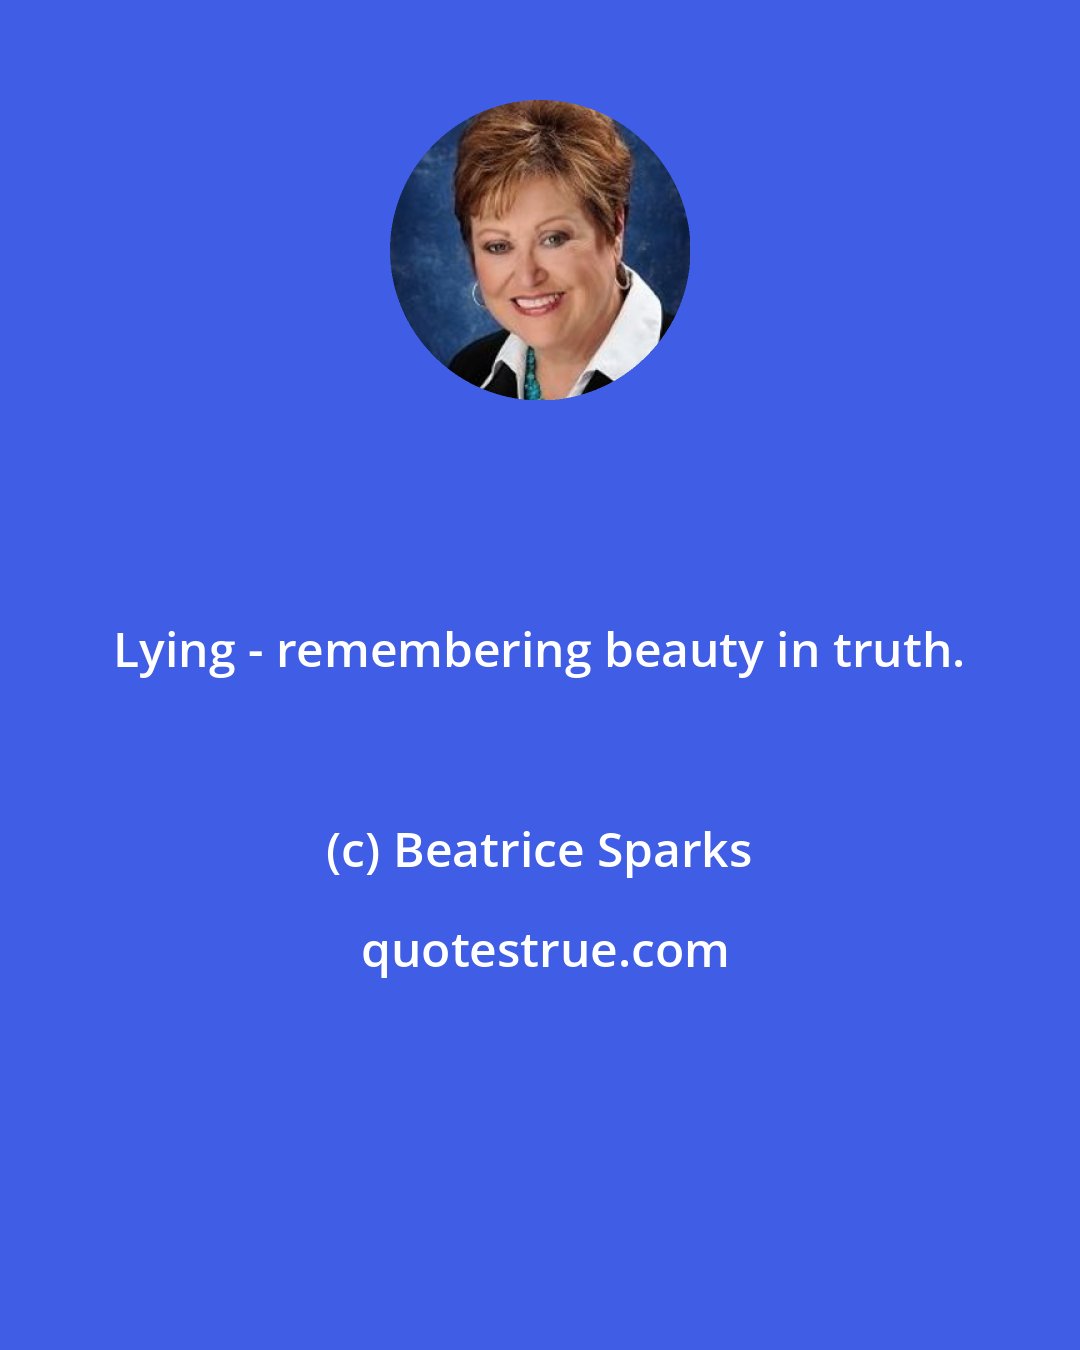 Beatrice Sparks: Lying - remembering beauty in truth.